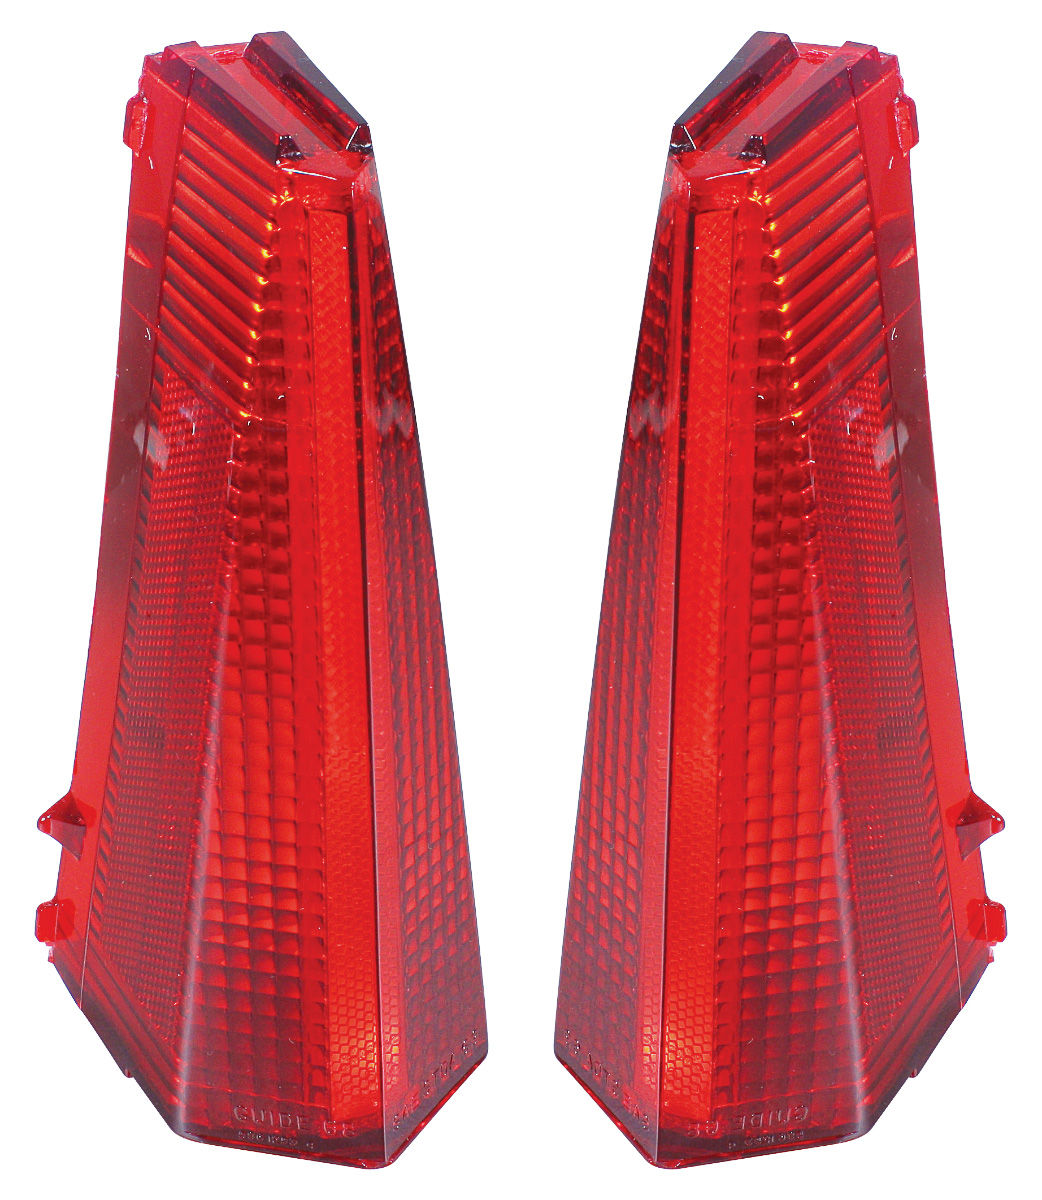 Details about   1969 Cadillac DeVille Resin tail lights 1:24 1:25 scale Fits Jo-han 